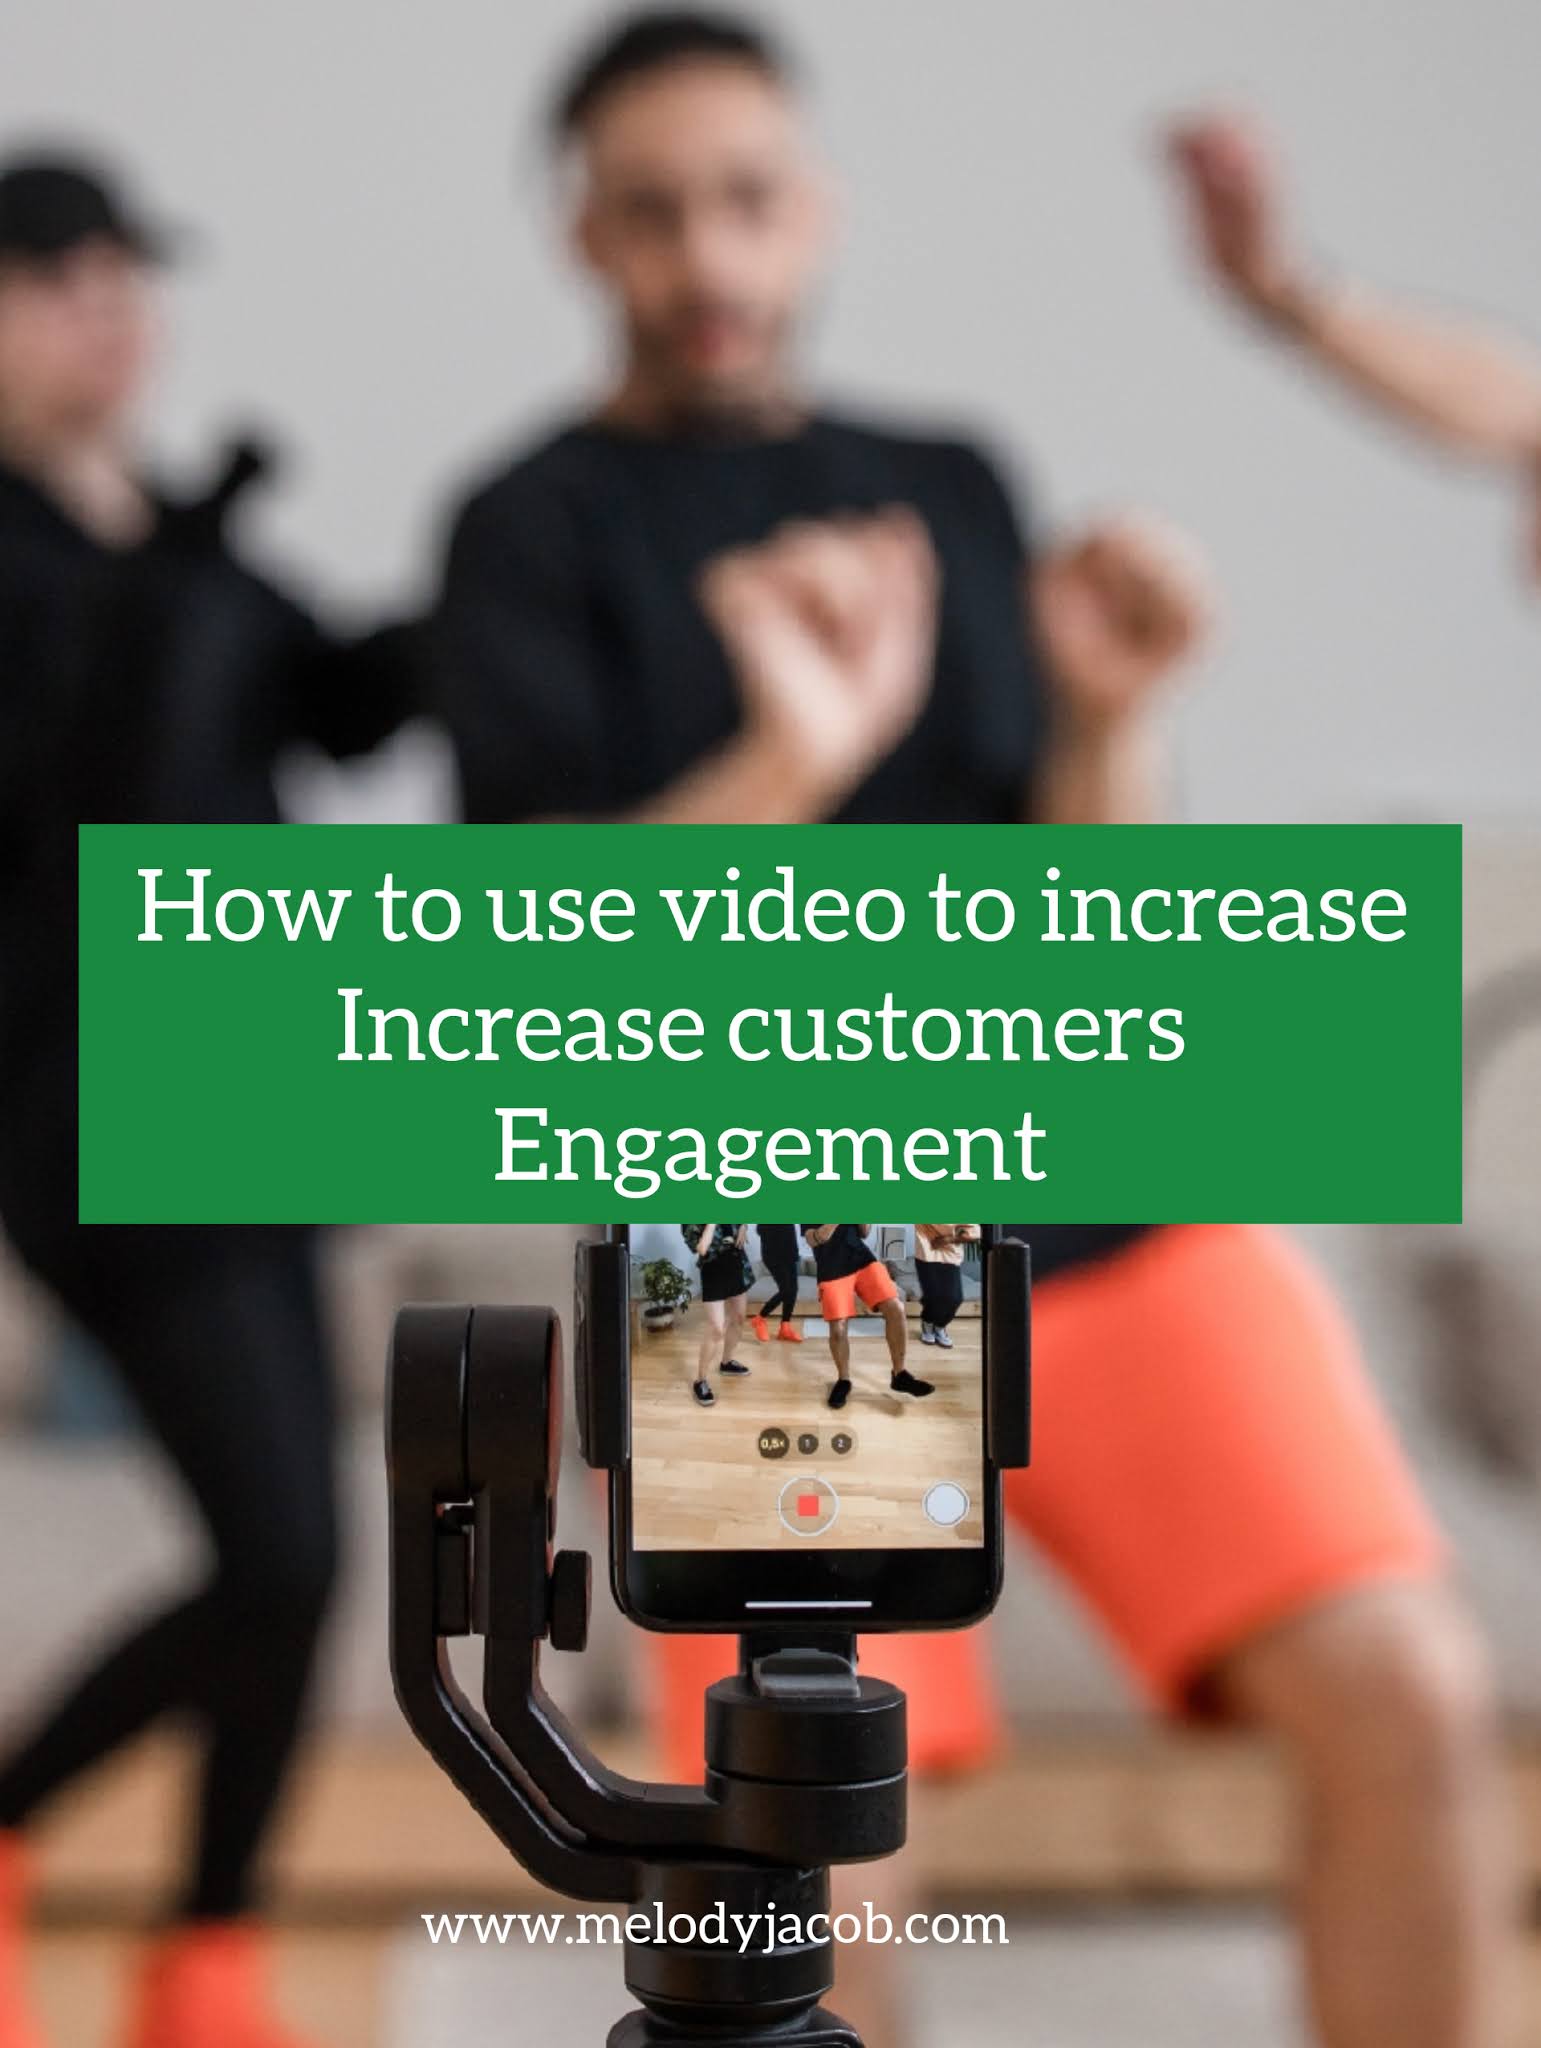 How to Improve Customer Engagement Using Video